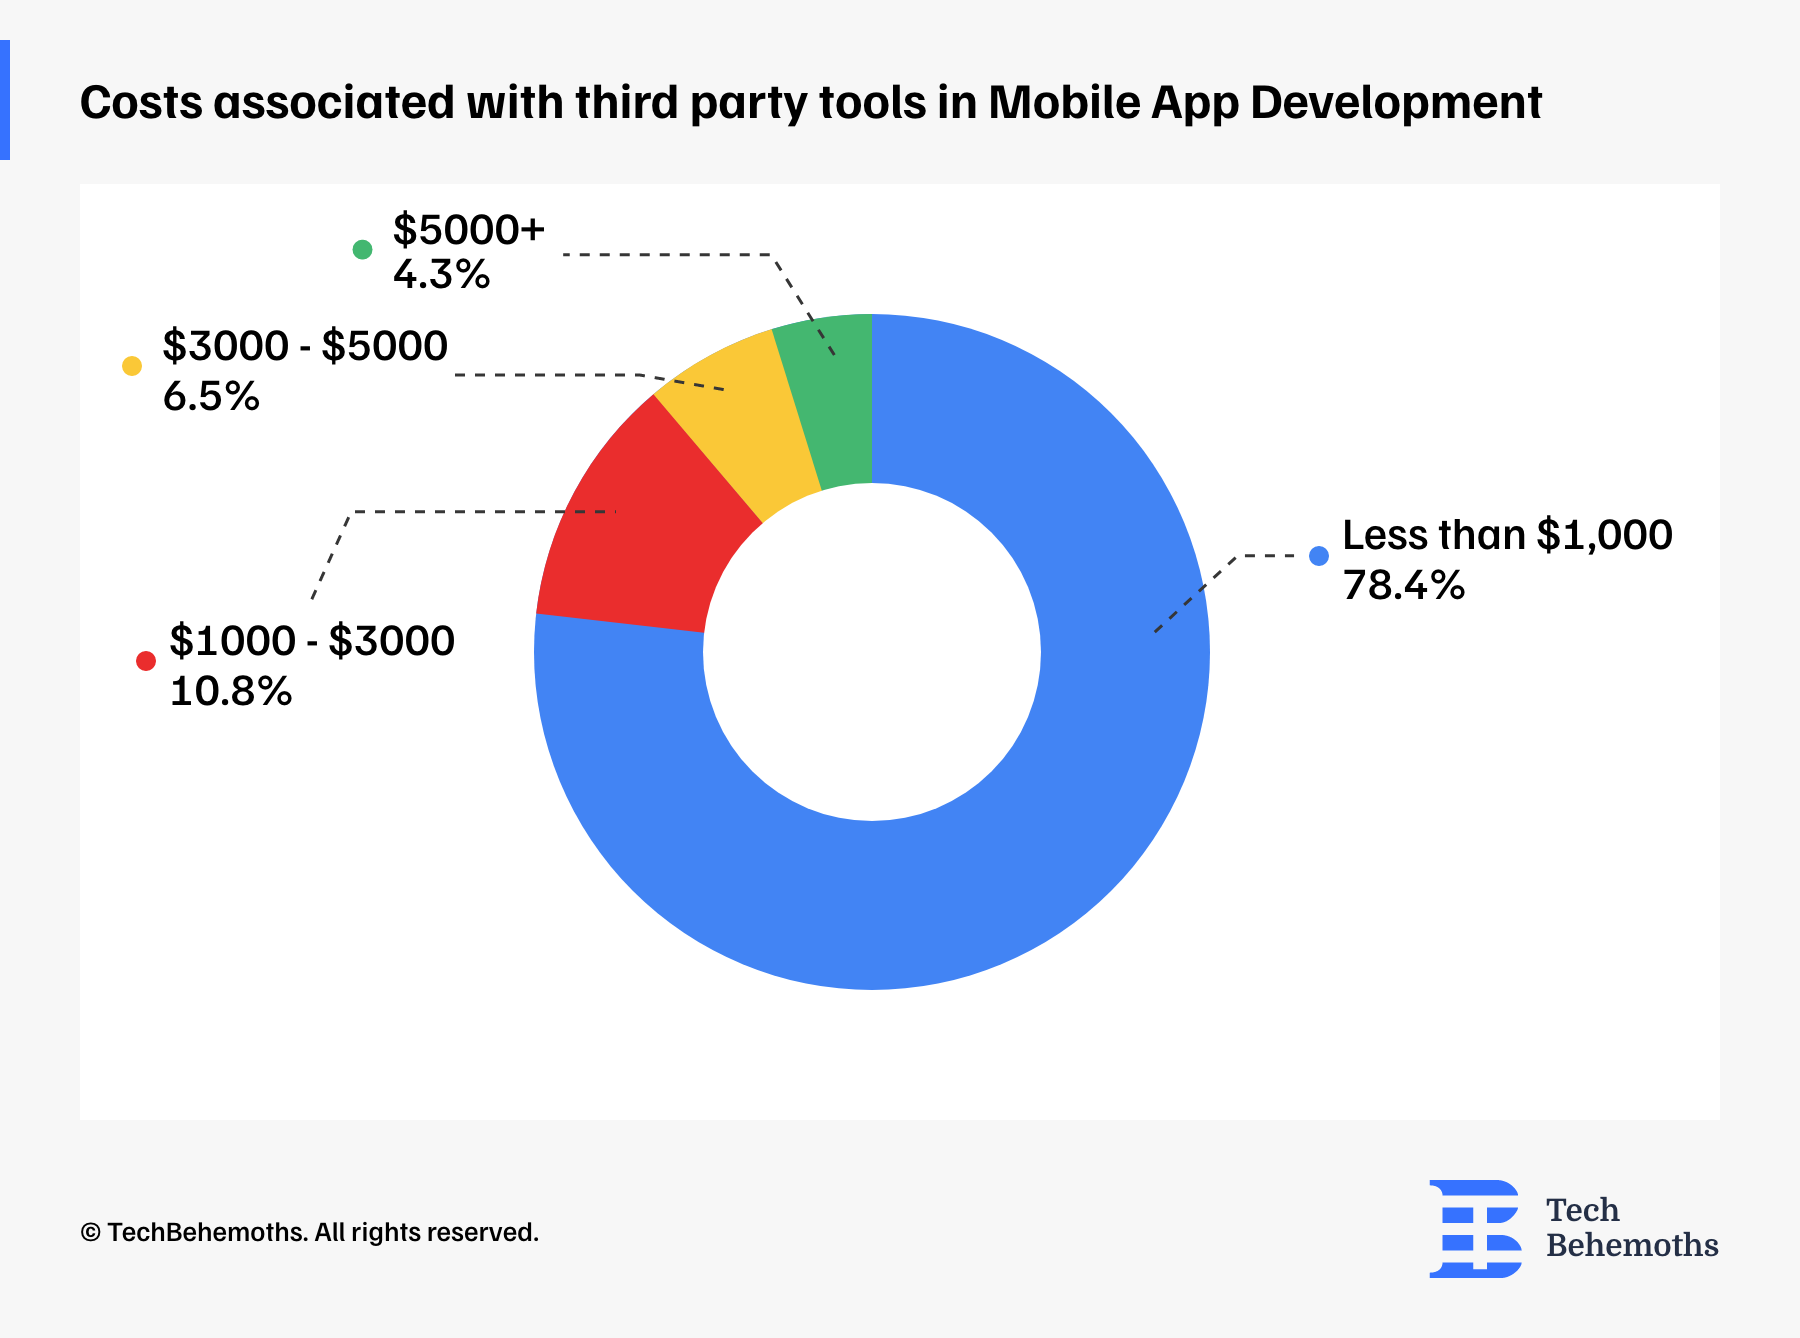 How much third party tools cost in mobile app development